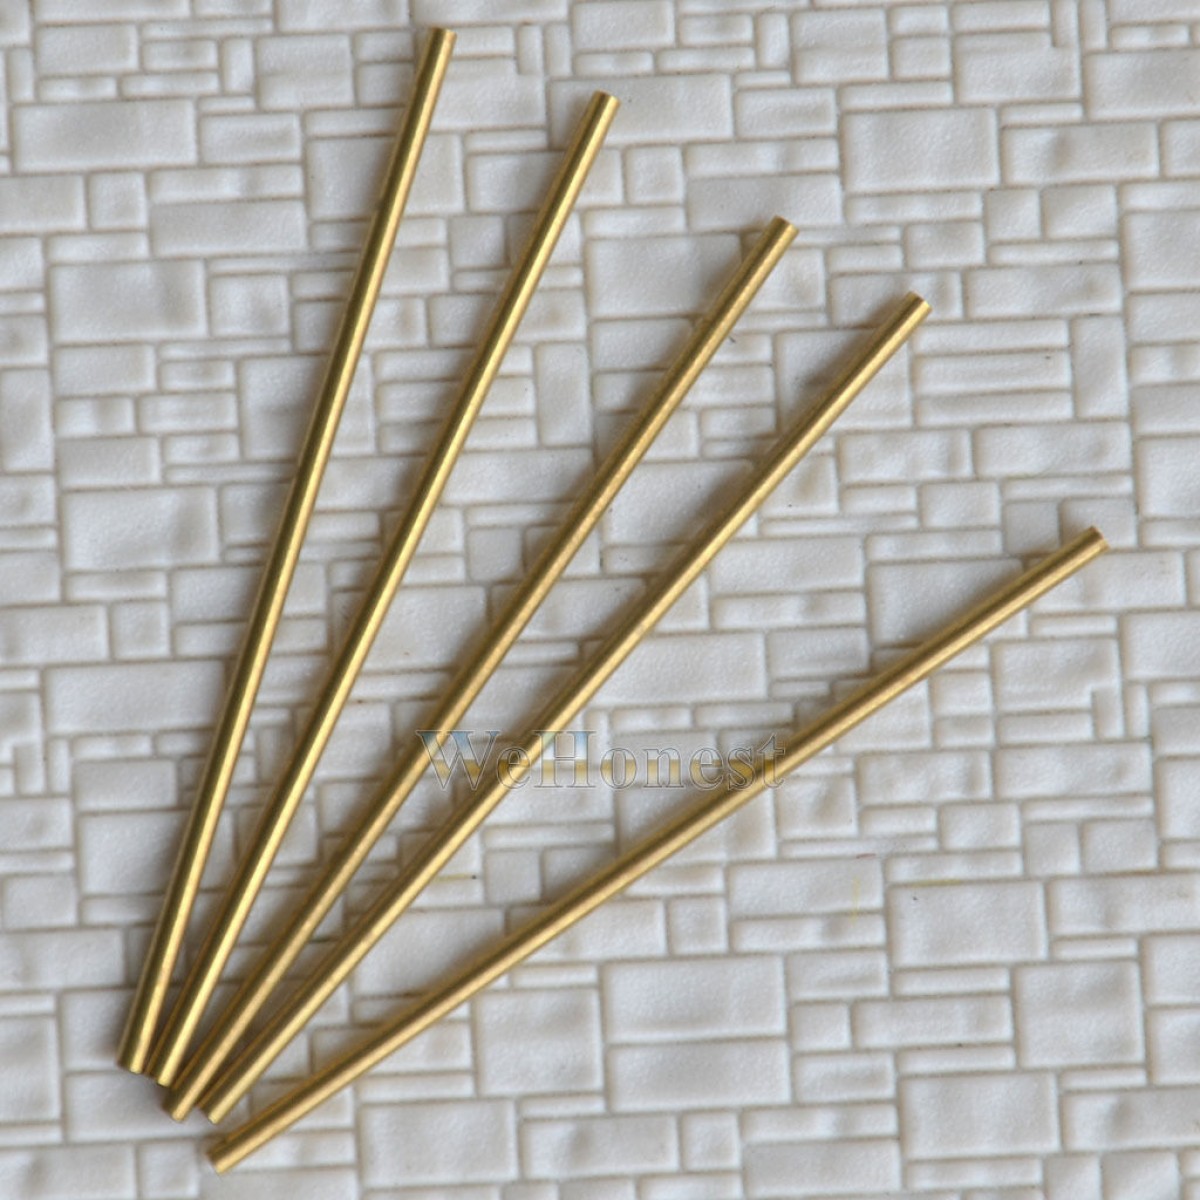   12  x   Brass  Pipe  Copper  Pipe  Copper  Tube  Φ1.7mm  x  60mm  (WeHonest)